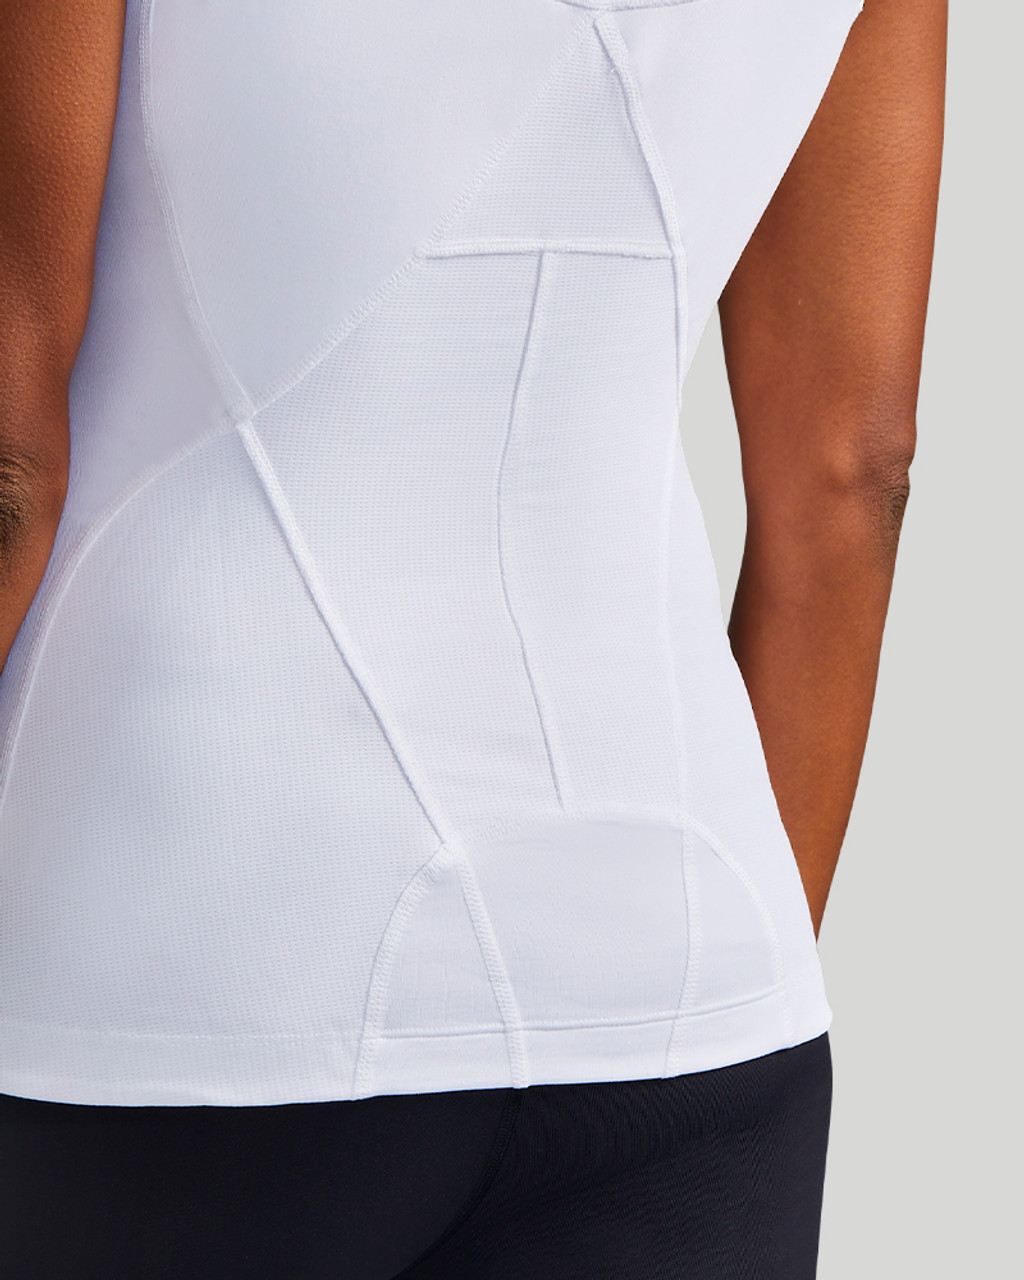 Does back pain stop YOU doing things you love? This support tank